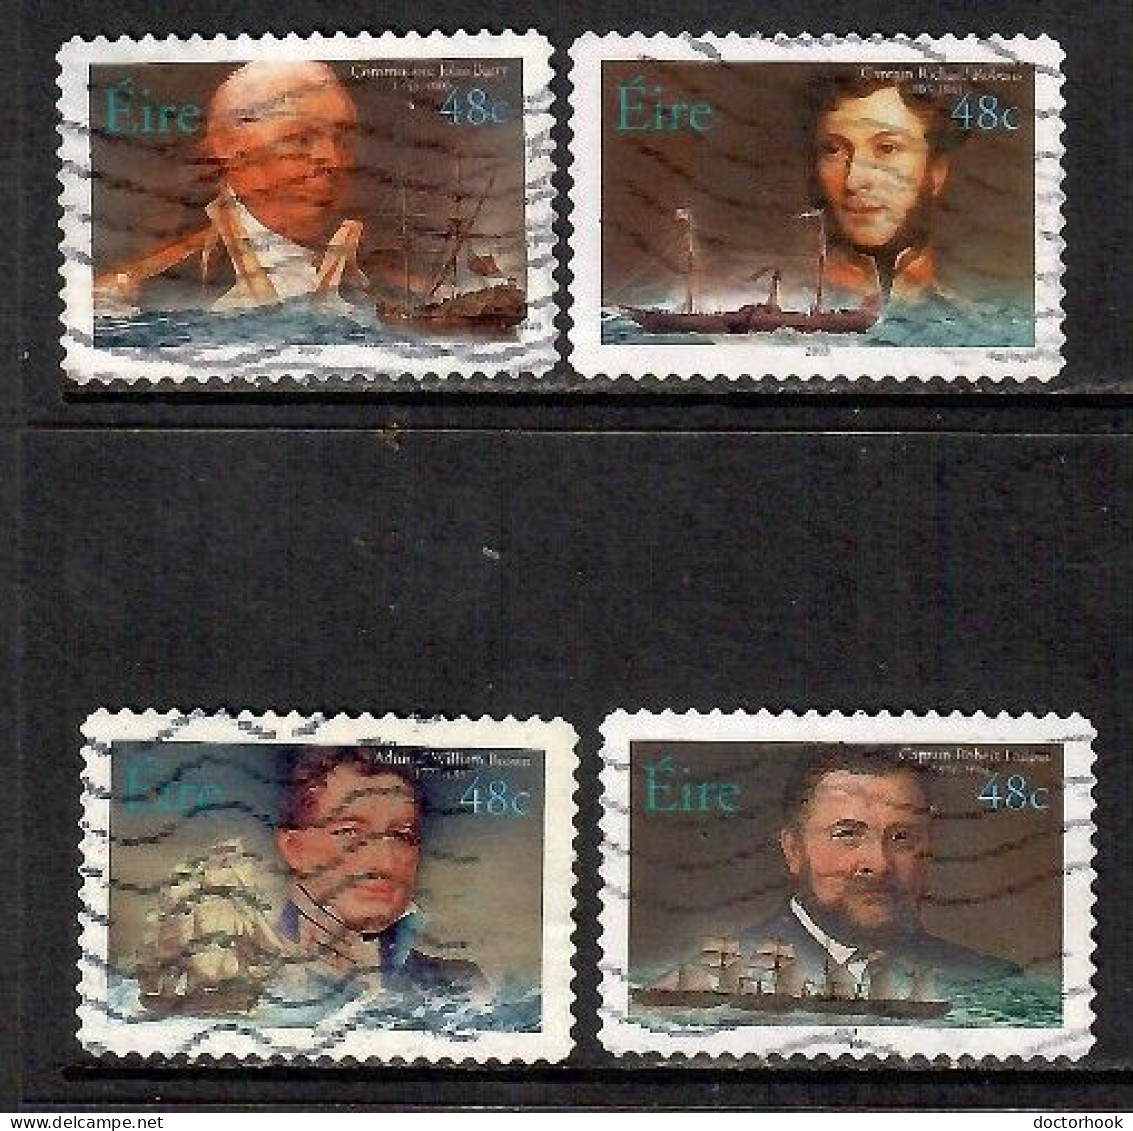 IRELAND   Scott # 1506-9 USED (CONDITION AS PER SCAN) (Stamp Scan # 992-9) - Usati